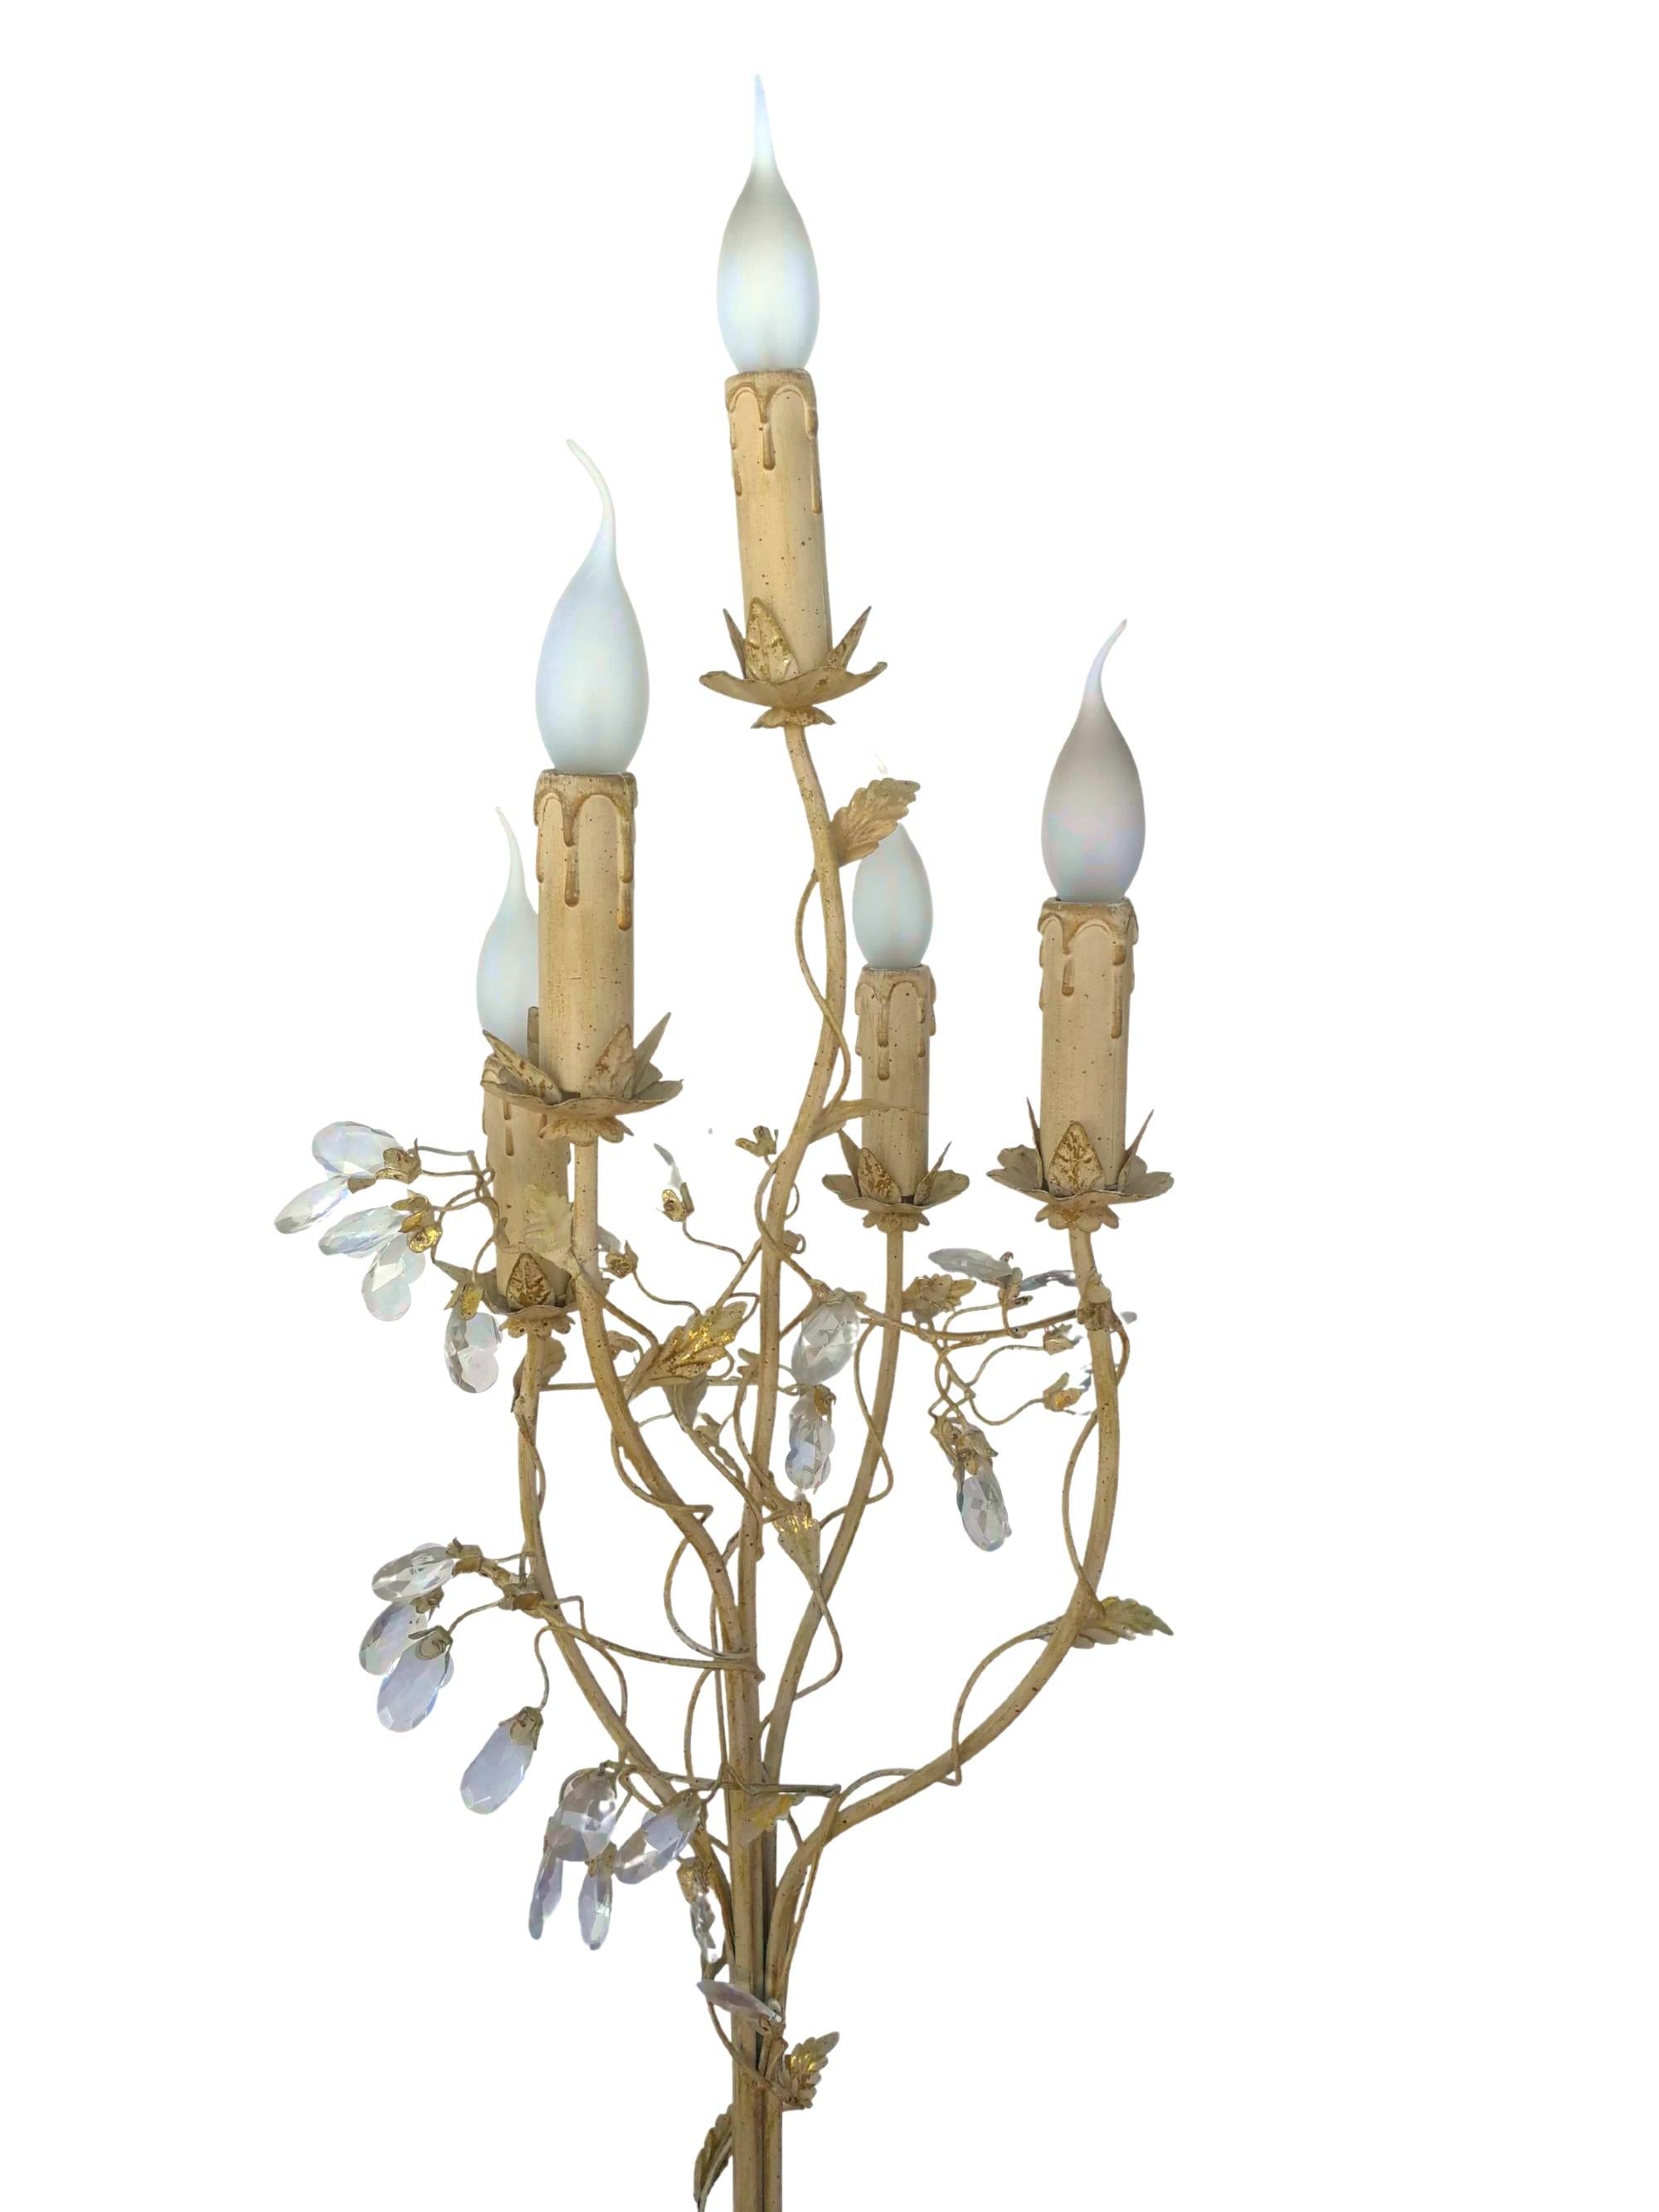 From the base rise 5 stems forming a trunk, which spread out from each other at the top, each of them serving as a support for a light. Each stem is crowned with a corolla and 4 leaves forming a flower which serves as a support for a false candle in